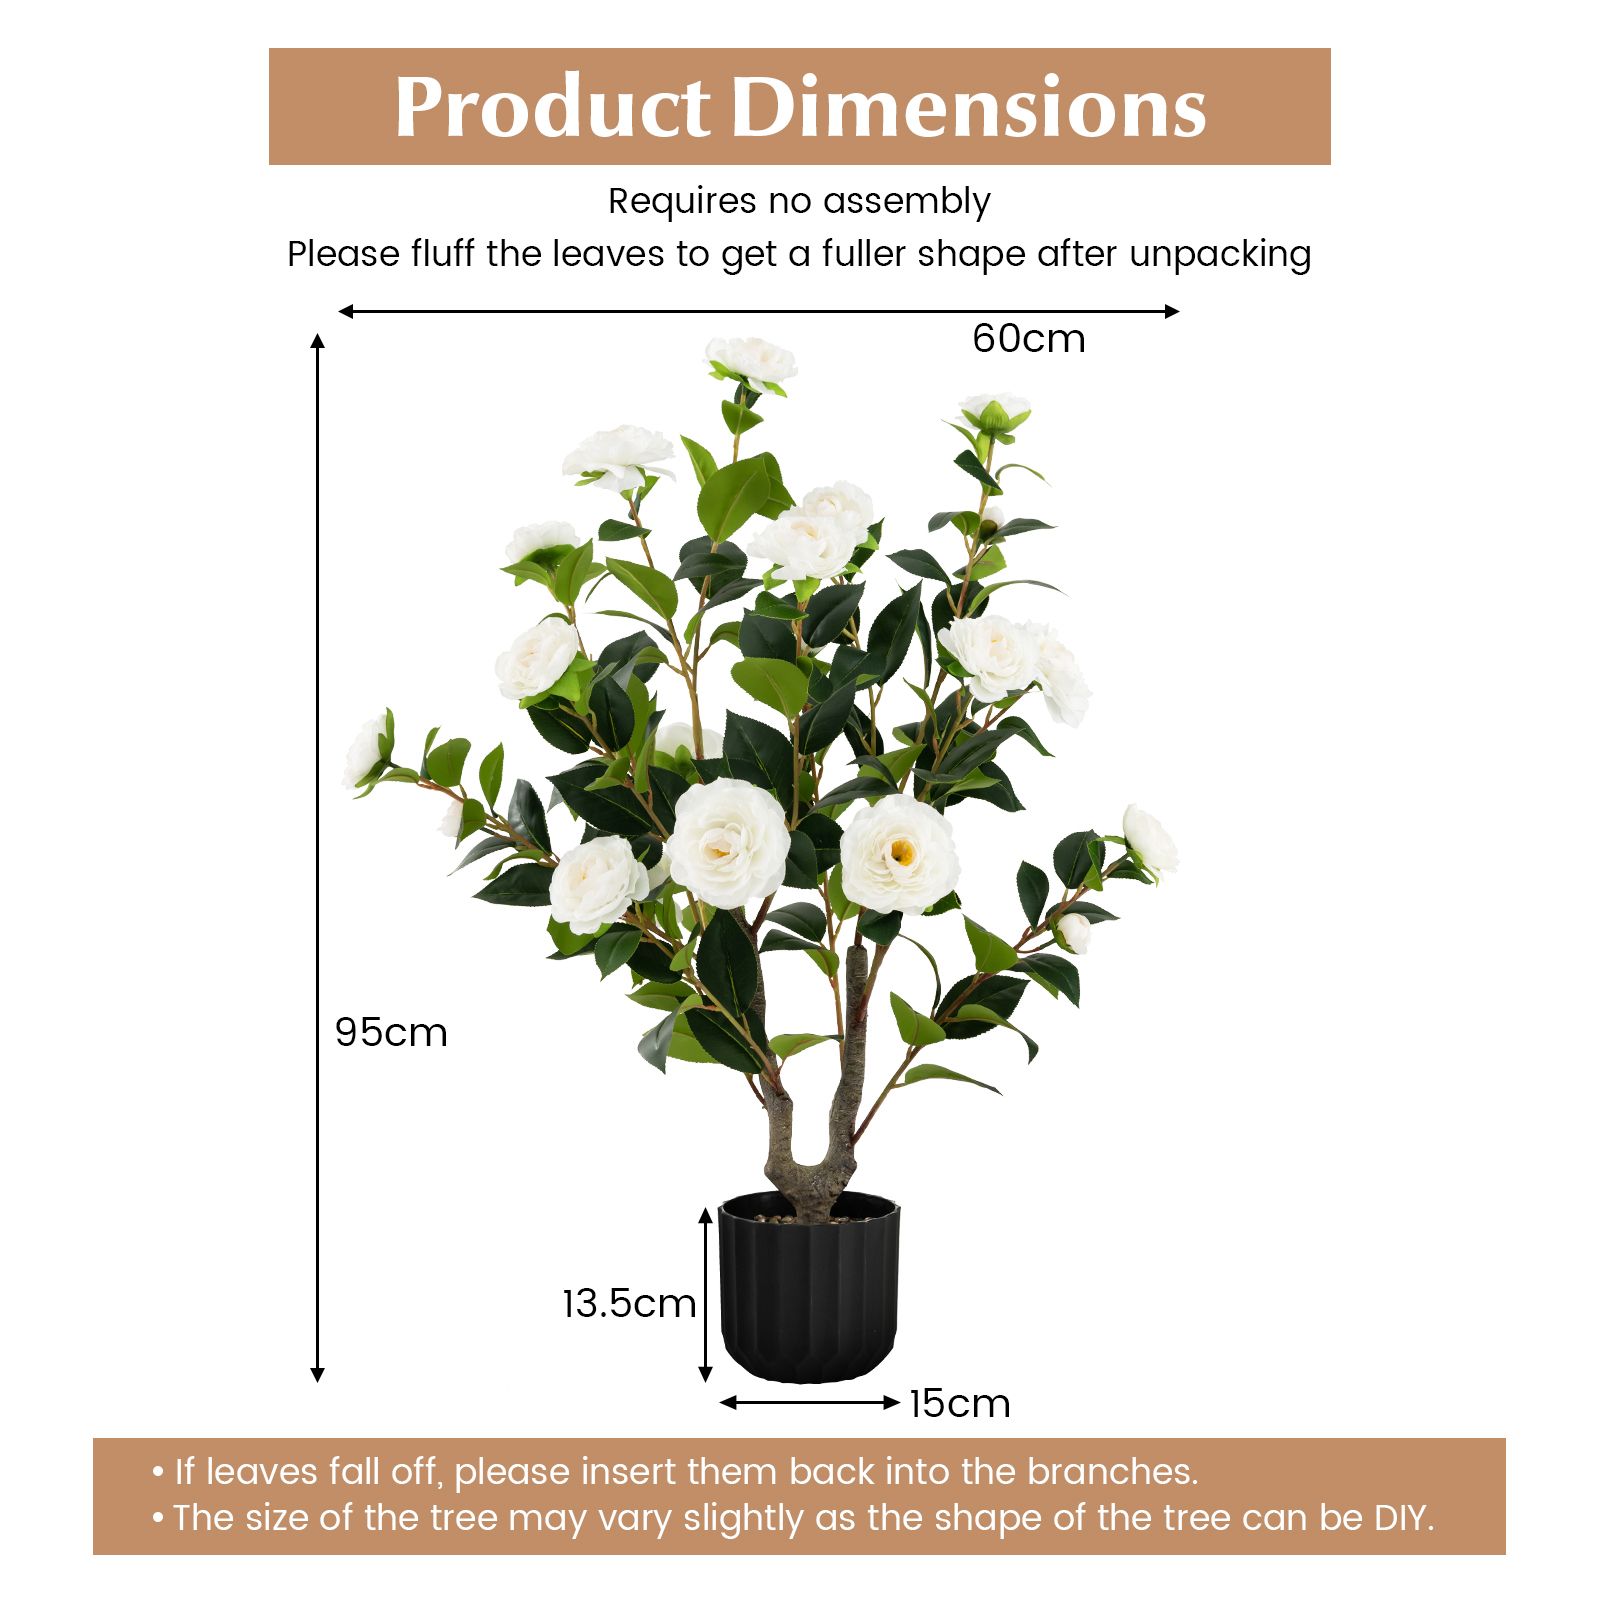 95cm Artificial Camellia Tree with Flowers and Rain-Flower Pebbles White 2-Pack